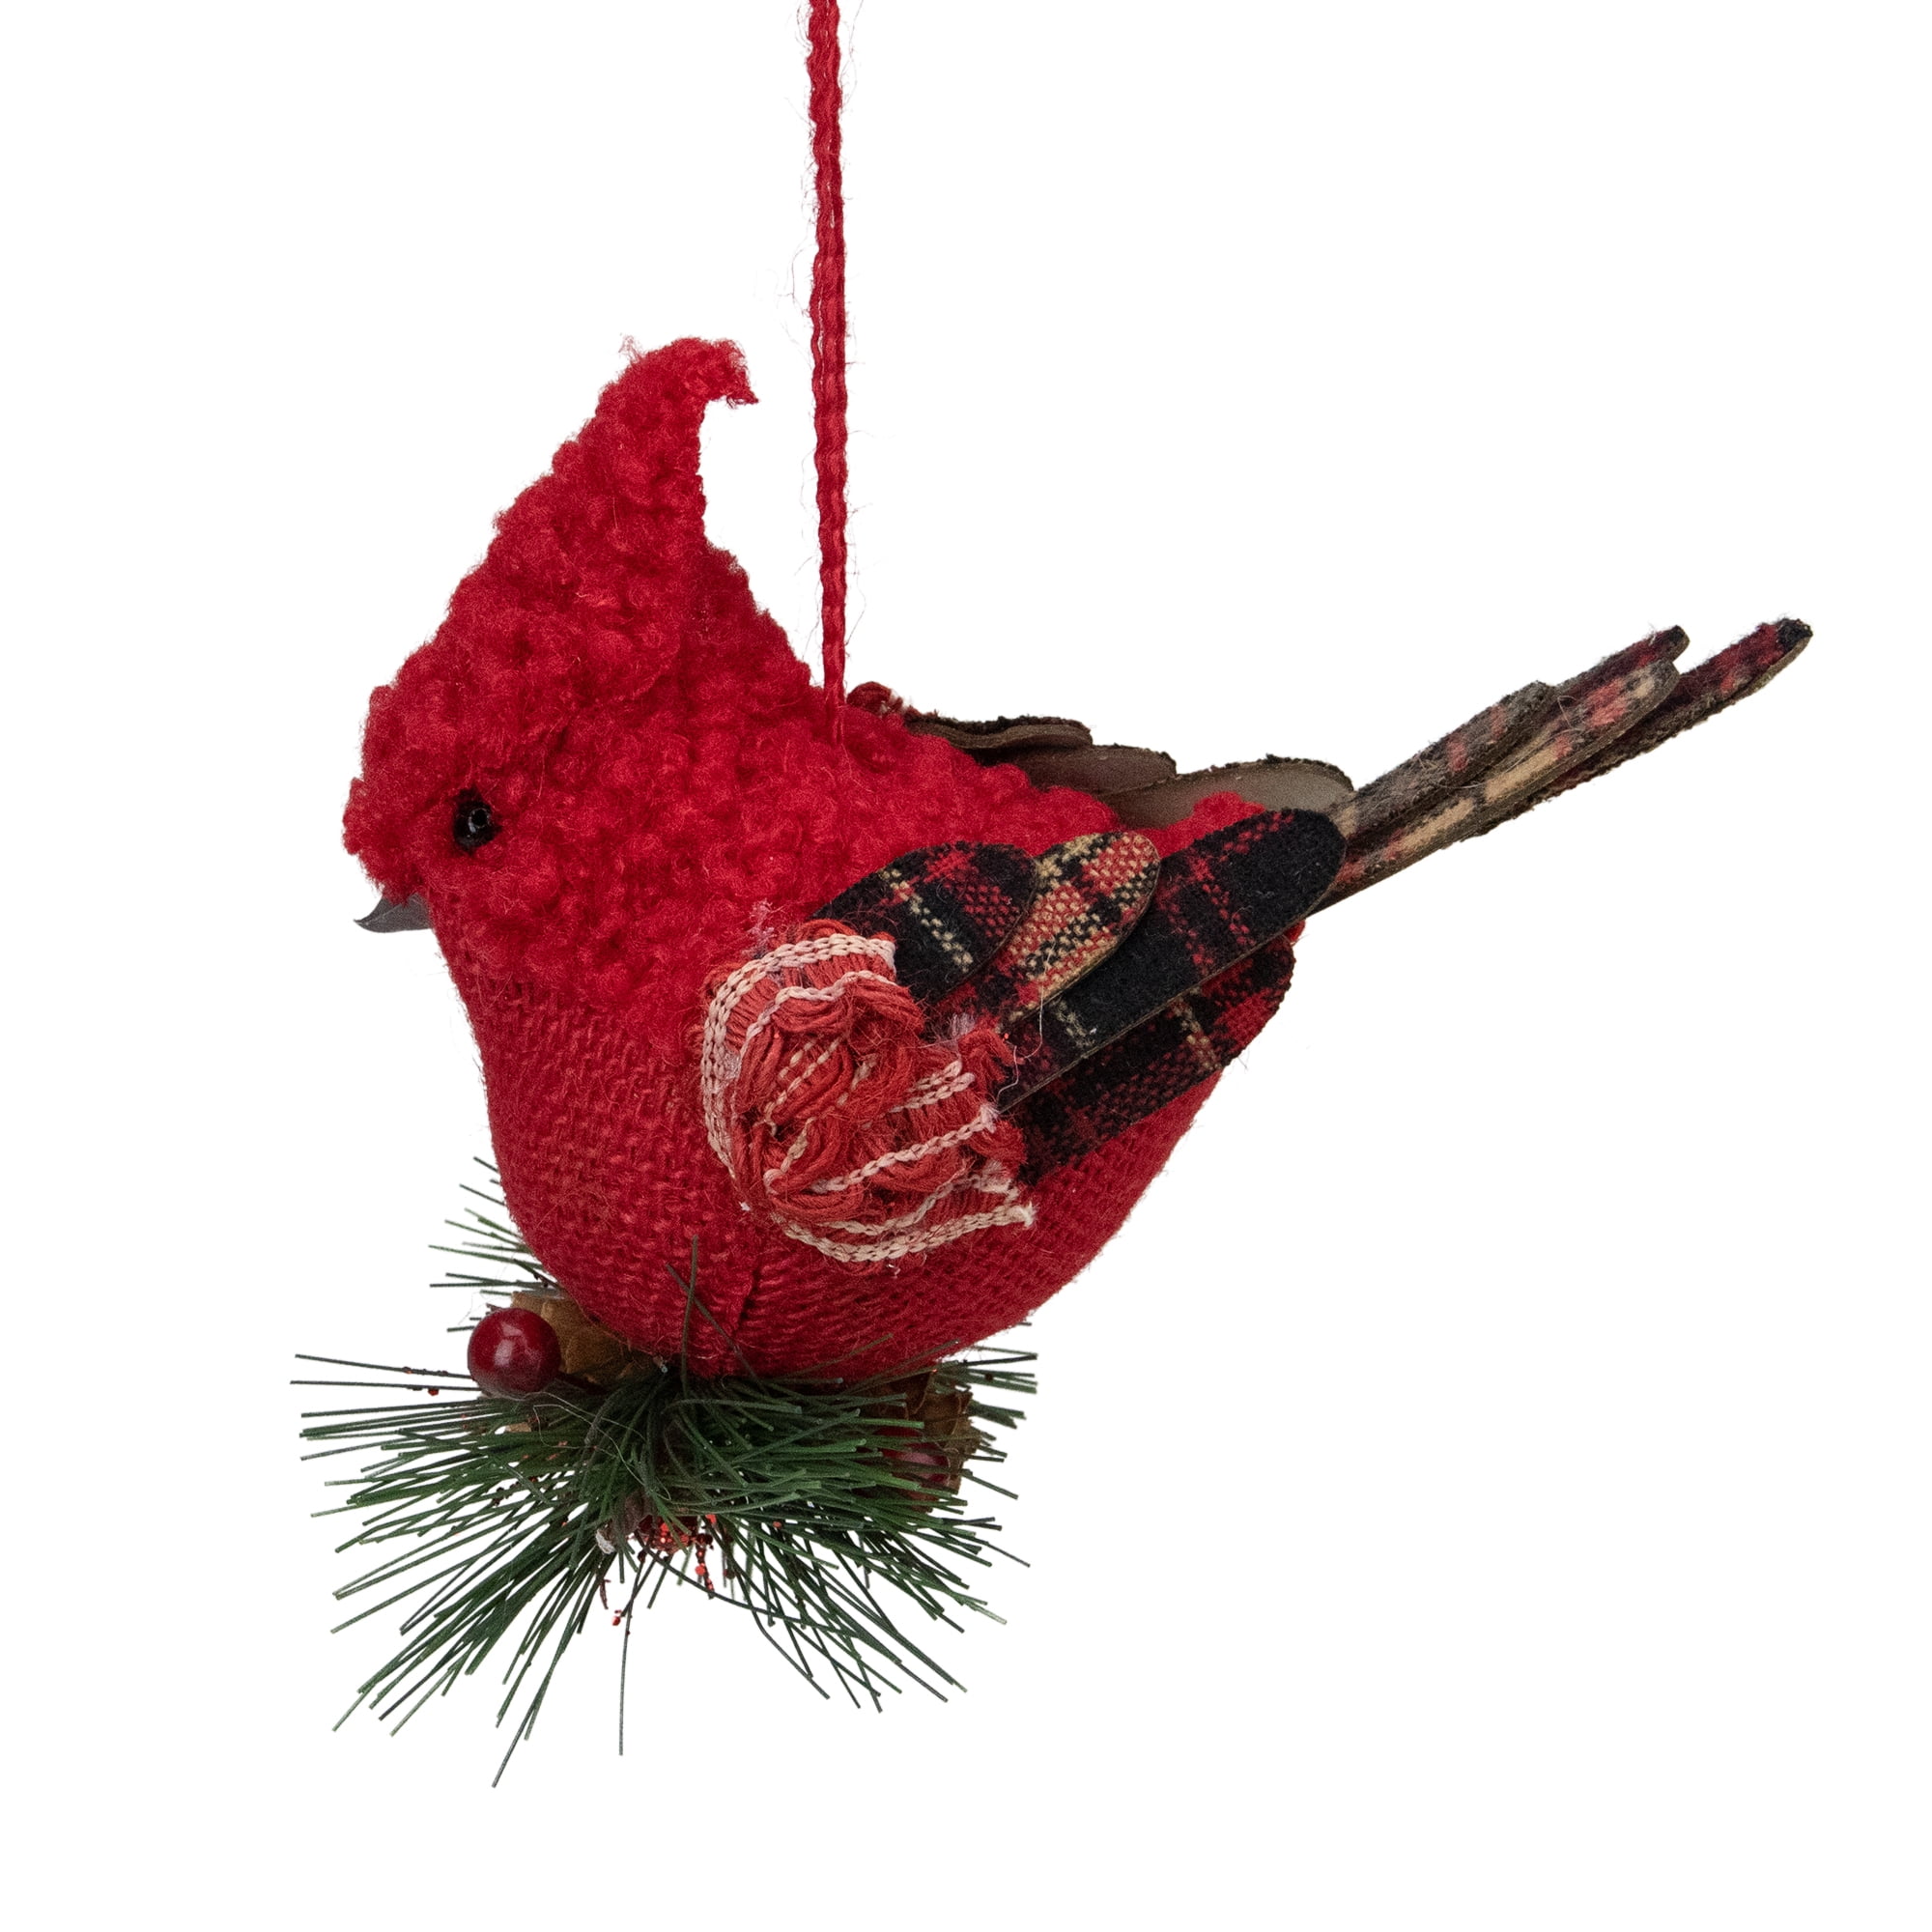 Clip-On Feathery Bird Ornament 4.5" Red Cardinal Arts Crafts Floral Wreath Decor 